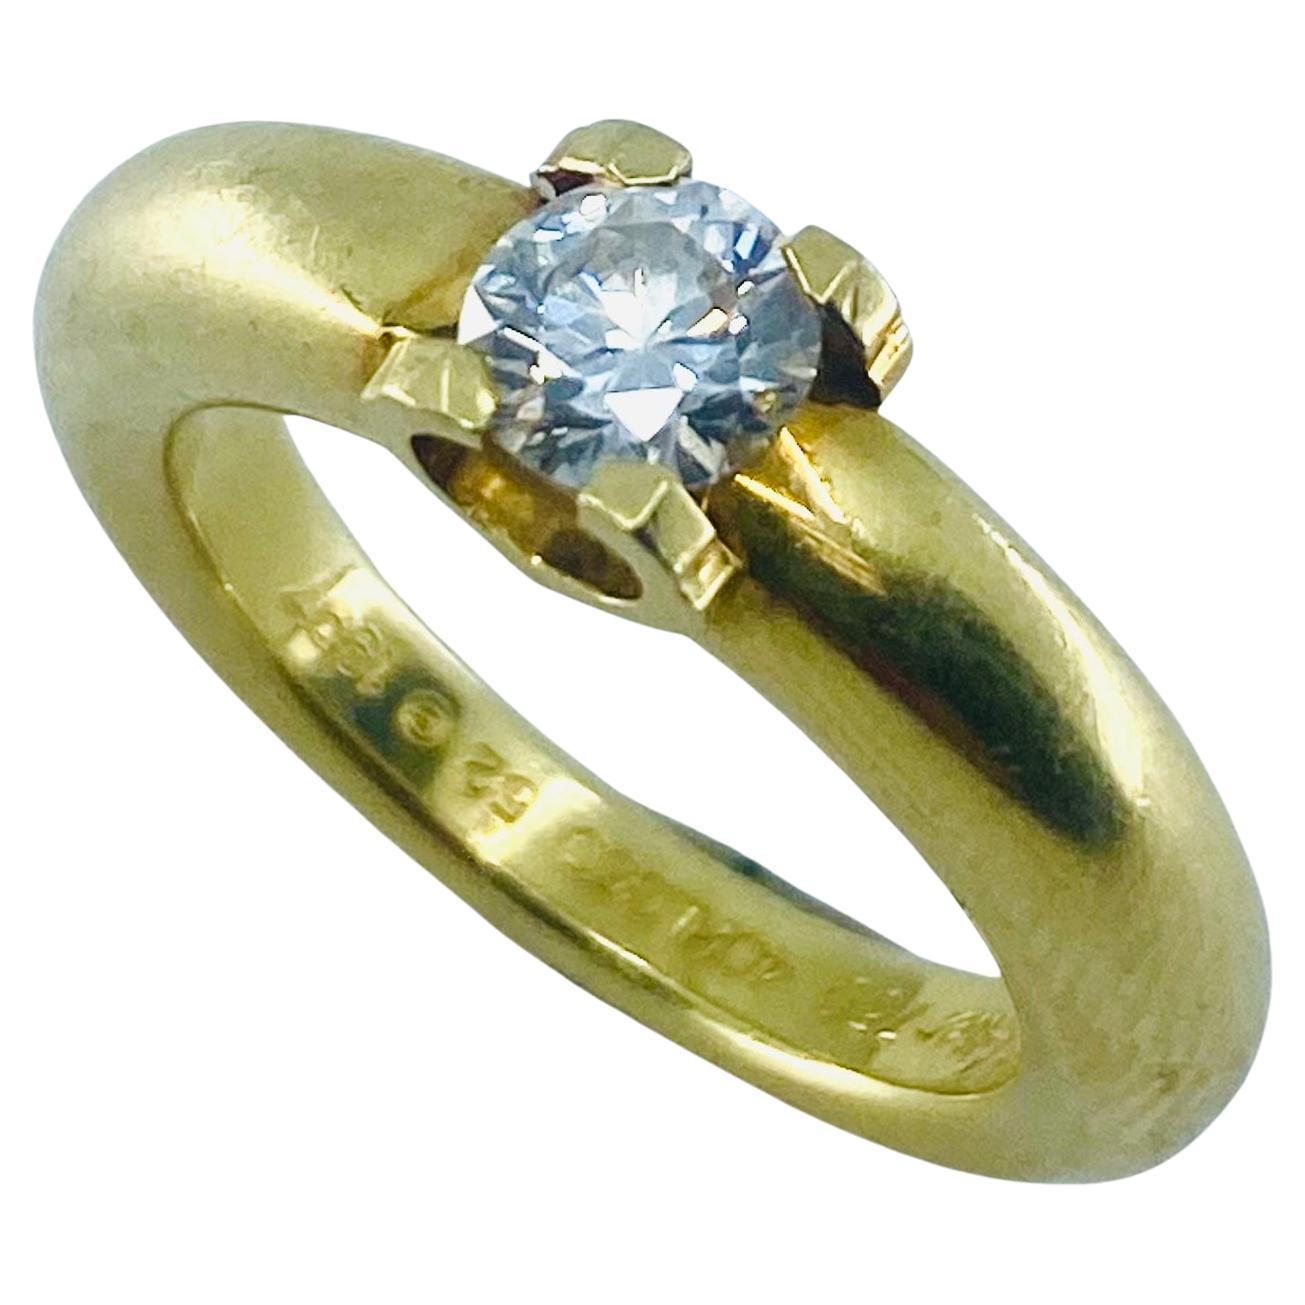 Cartier Solitaire Diamond Ring 18k Gold 